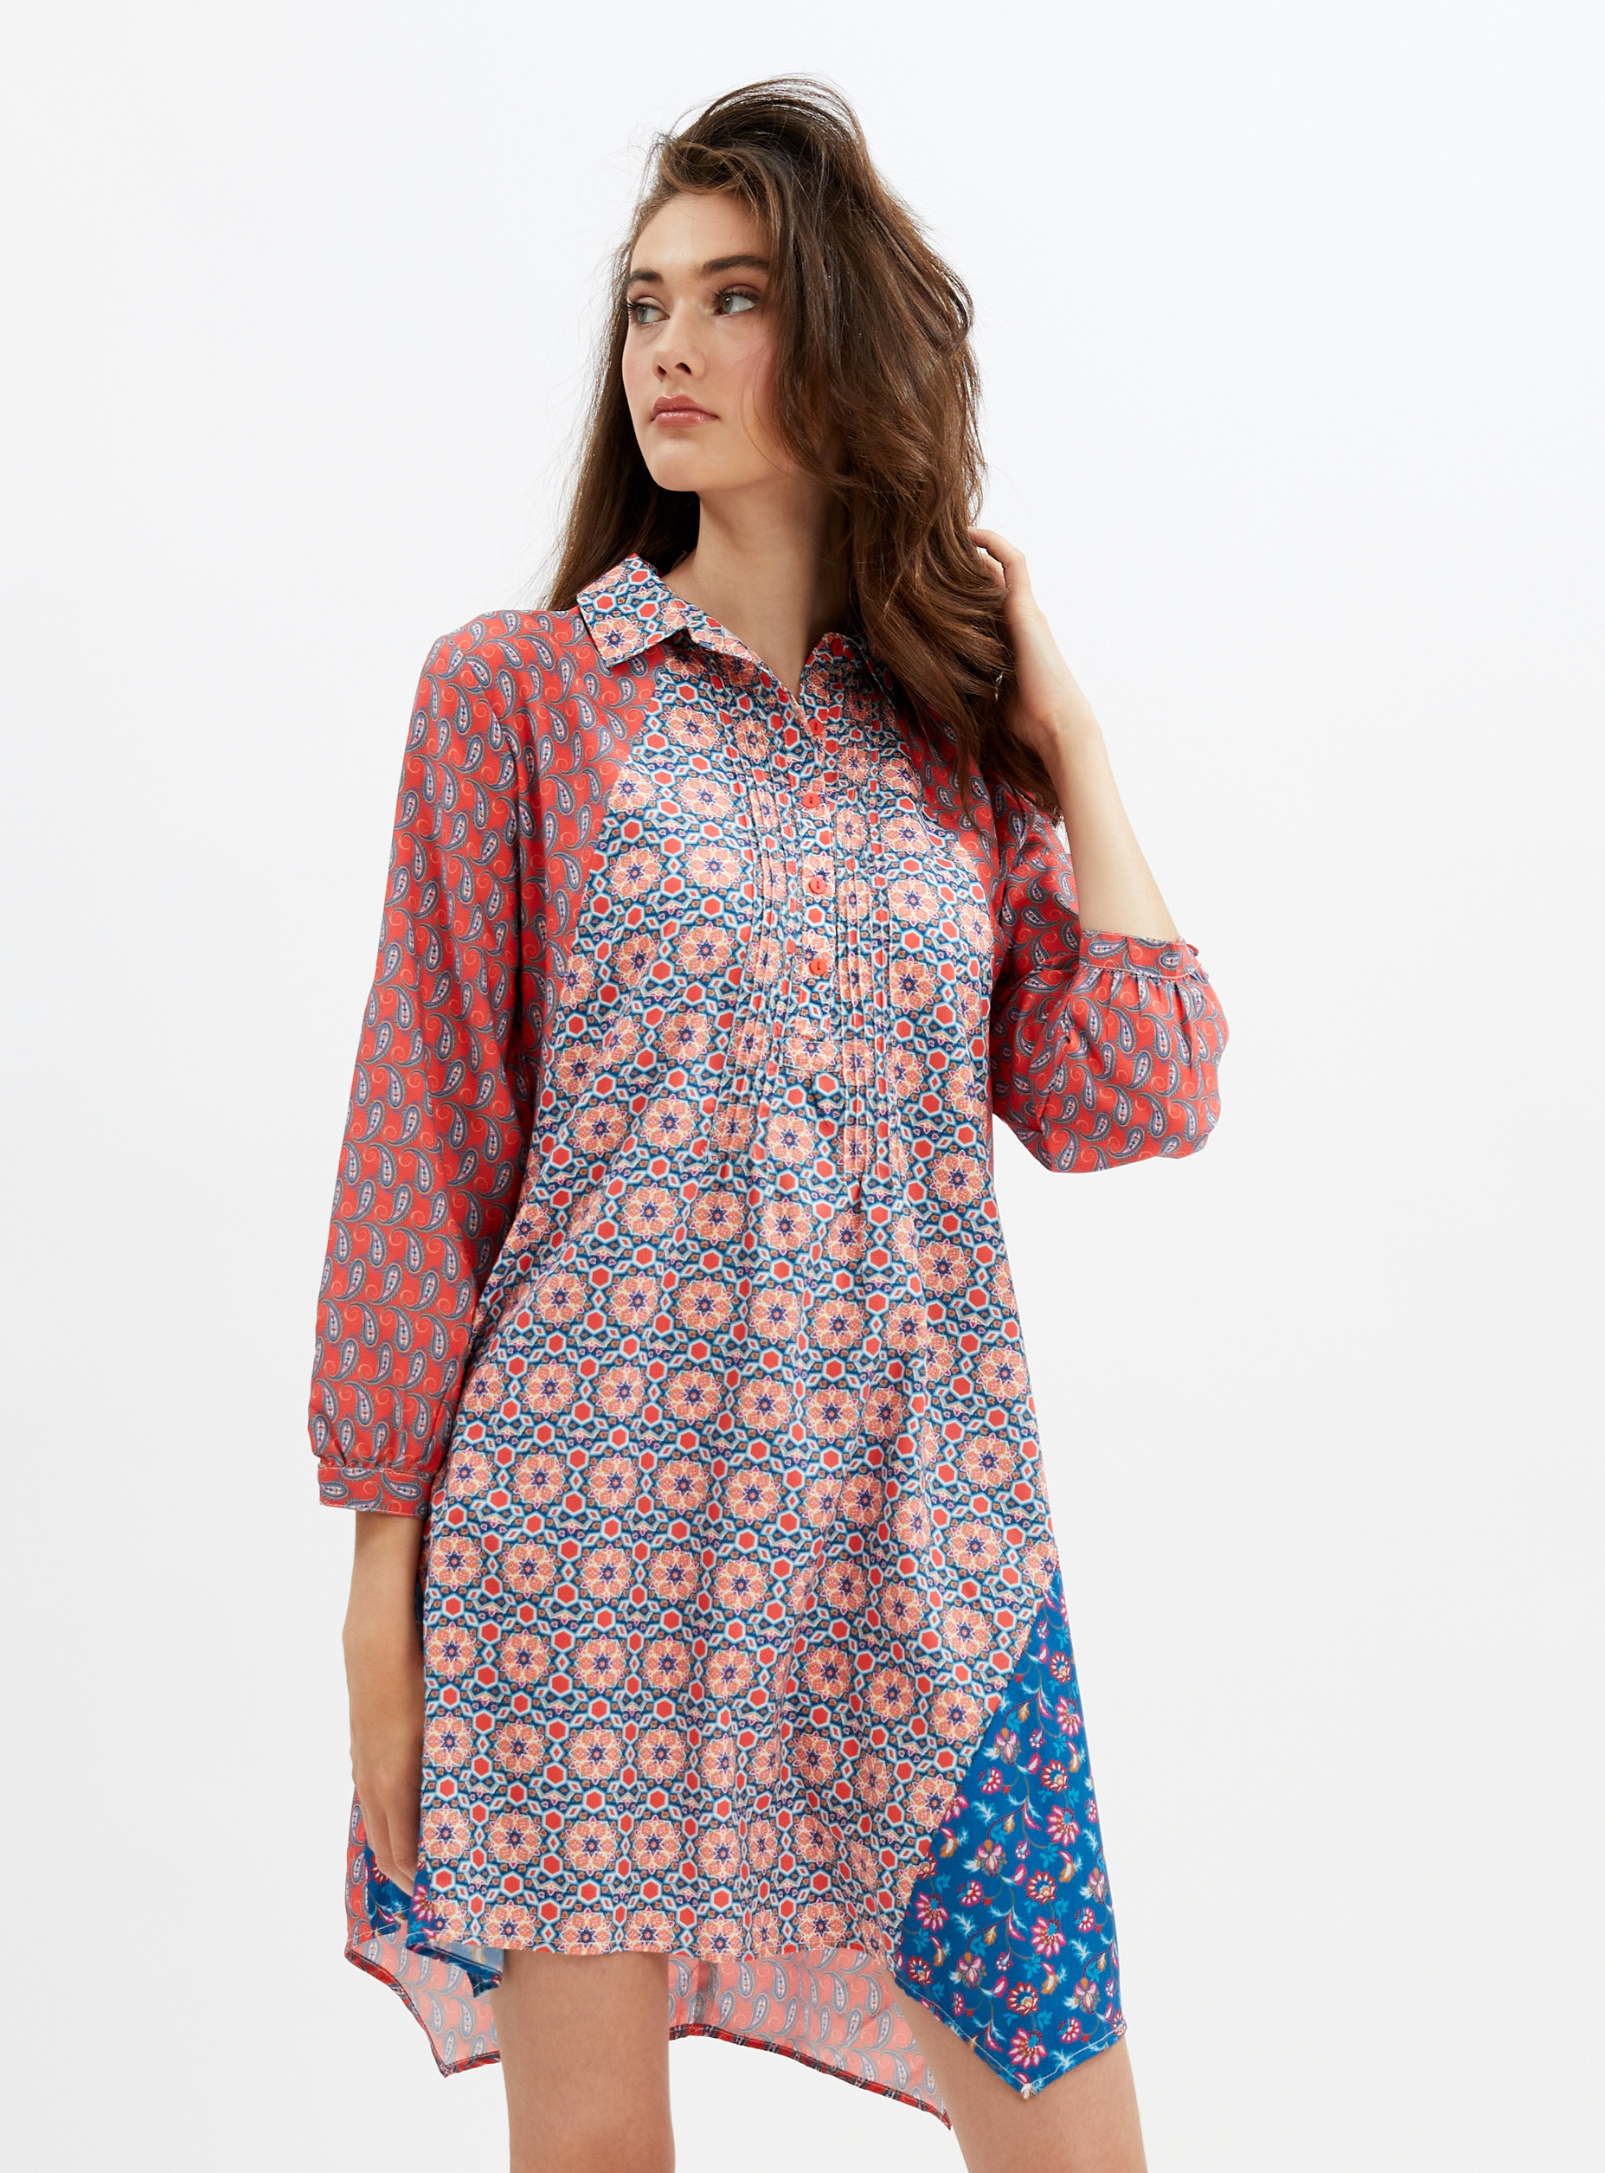 ROSEMARY| Buttoned Patterned Dress